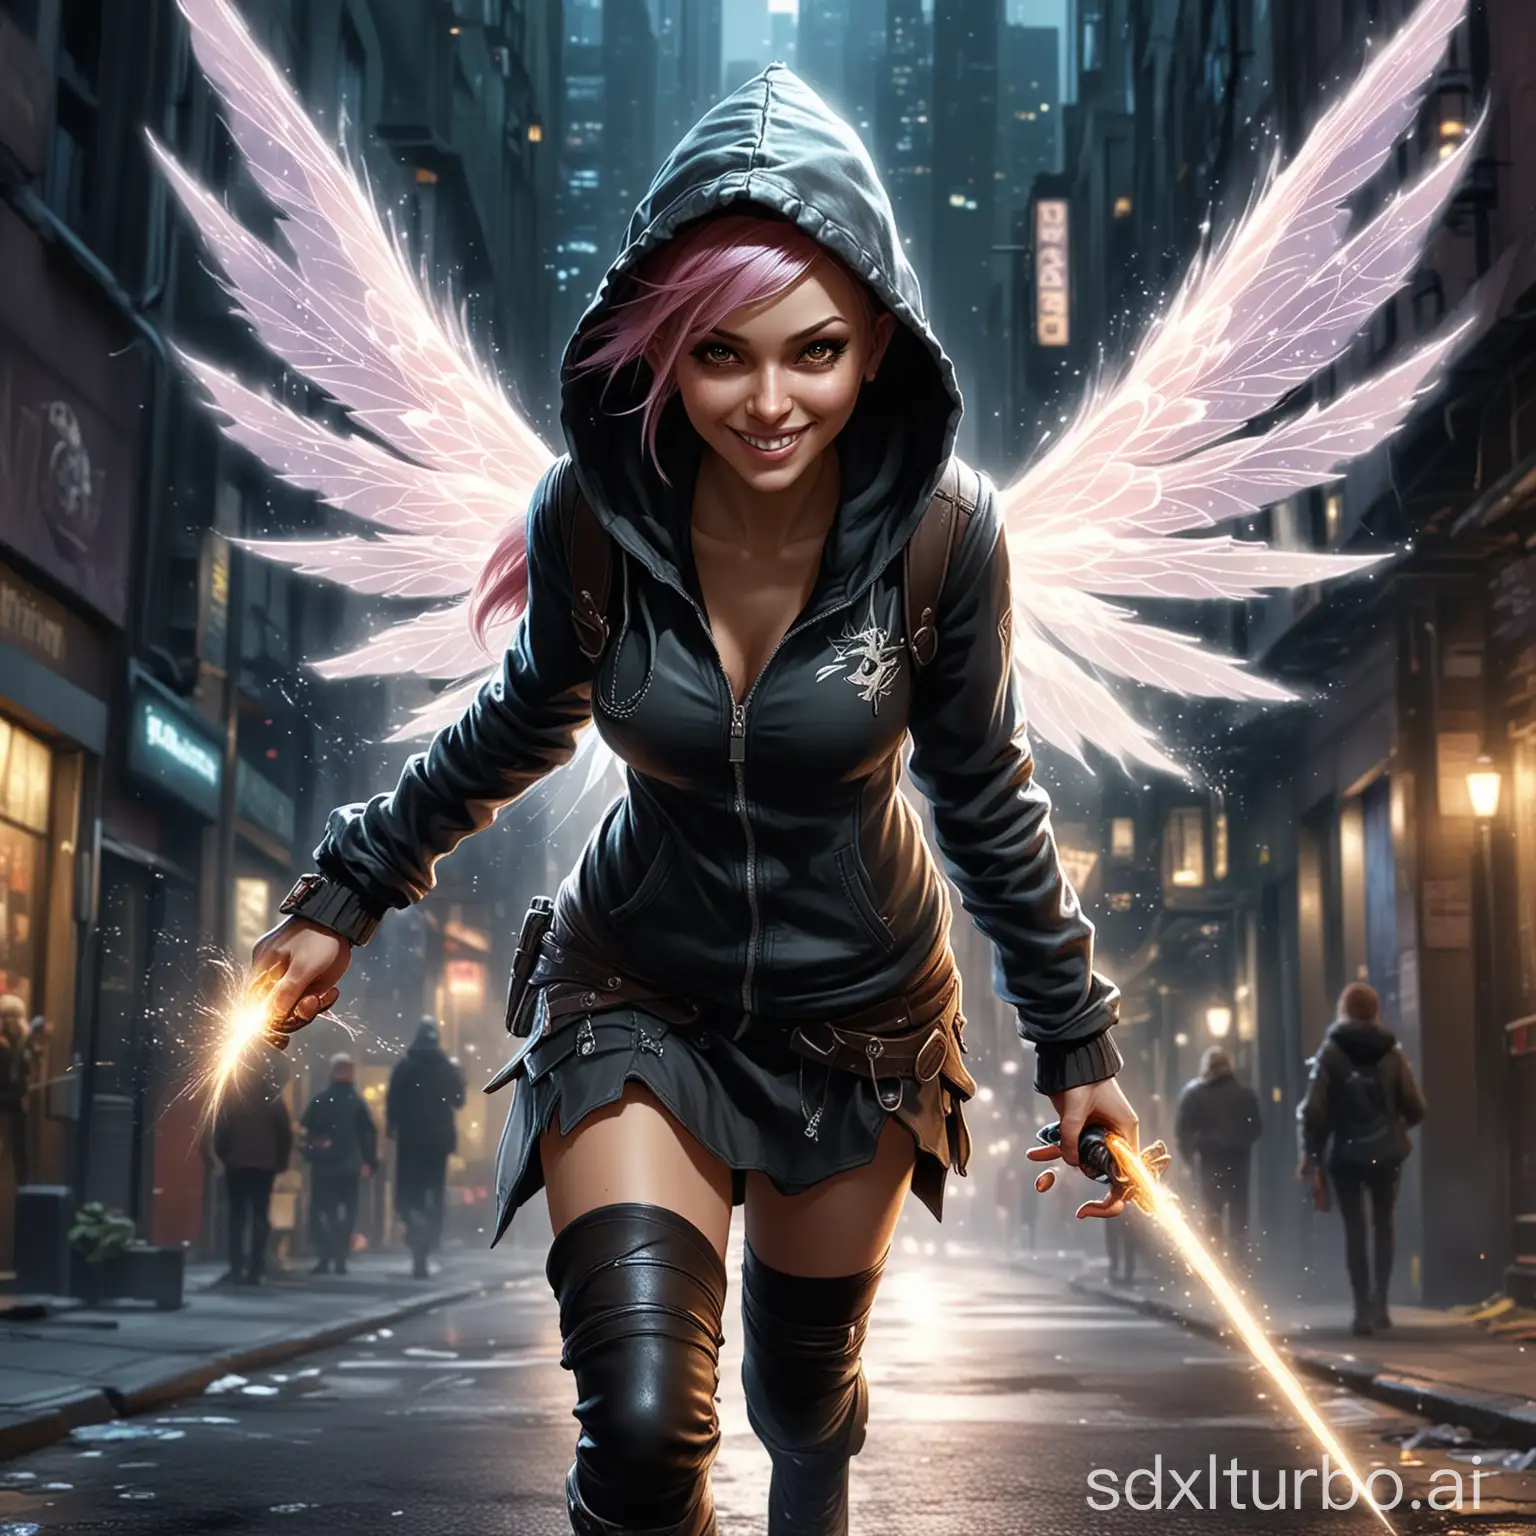 Create a high resolution, 16:9 aspect ratio, image about "A Shadowrun legend". Show a pixie wearing a hoodie grinning wide while blasting magic to the left side. The pixie flies with sparkling, translucent wings alone in a dark street of modern city.